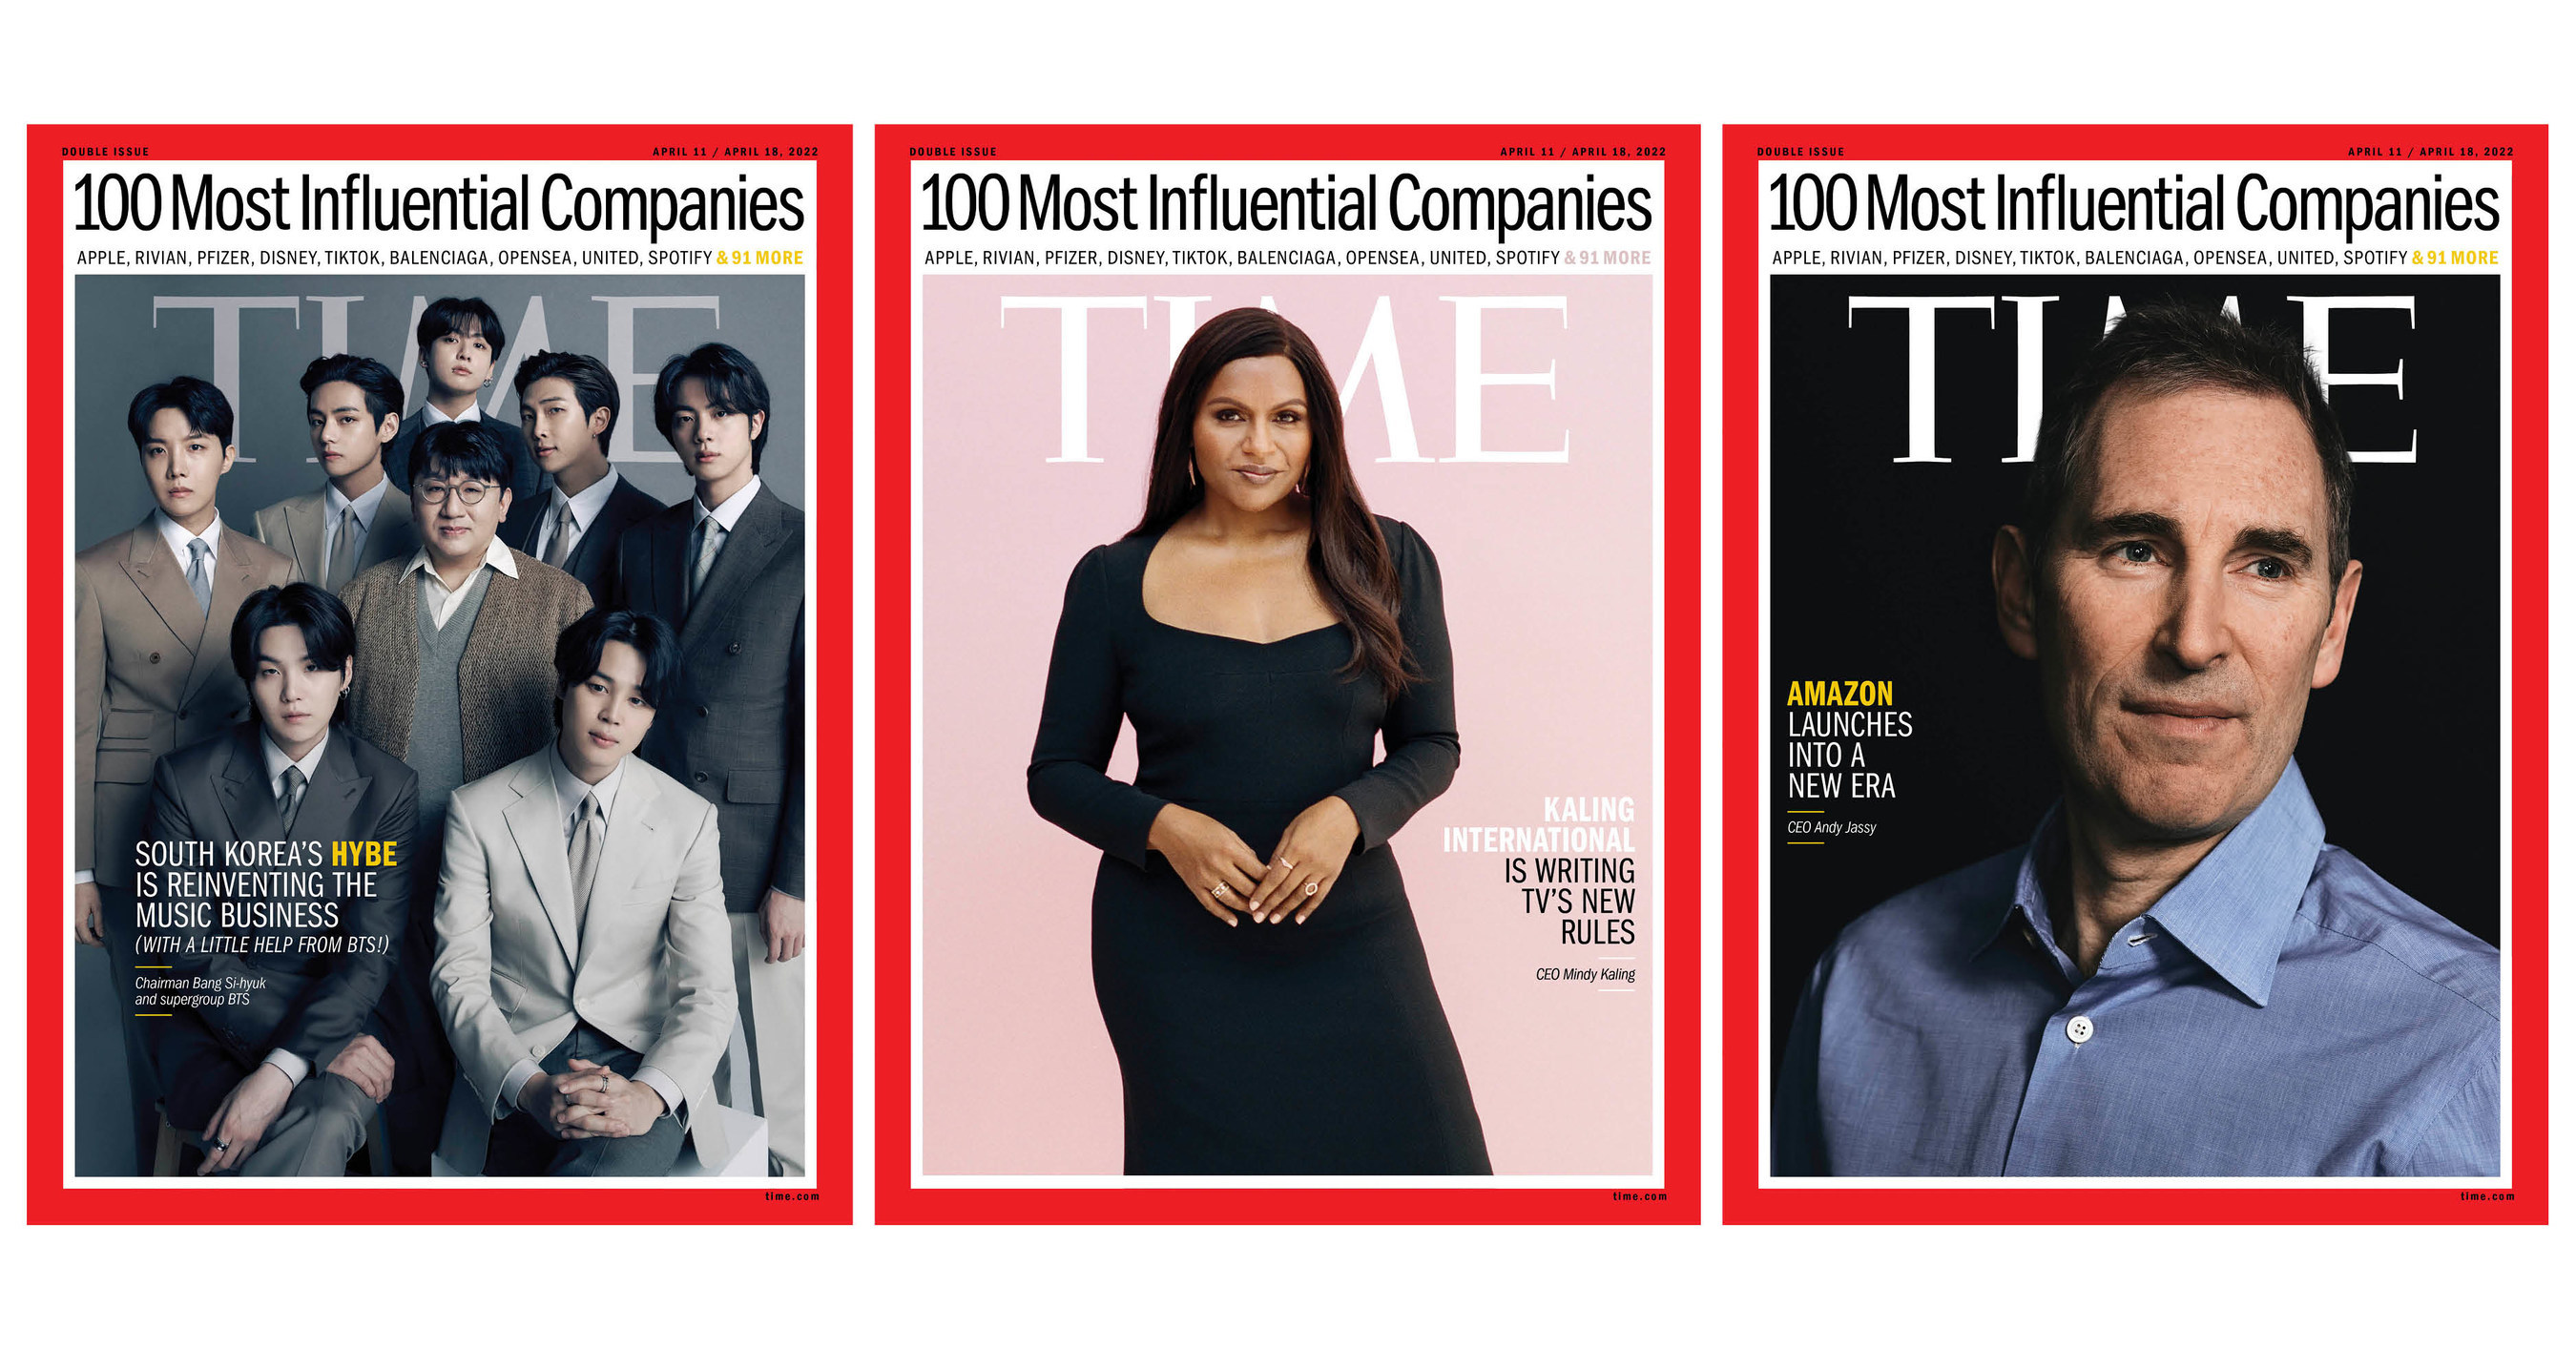 TIME Reveals its 2022 List of the TIME100 Most Influential Companies in